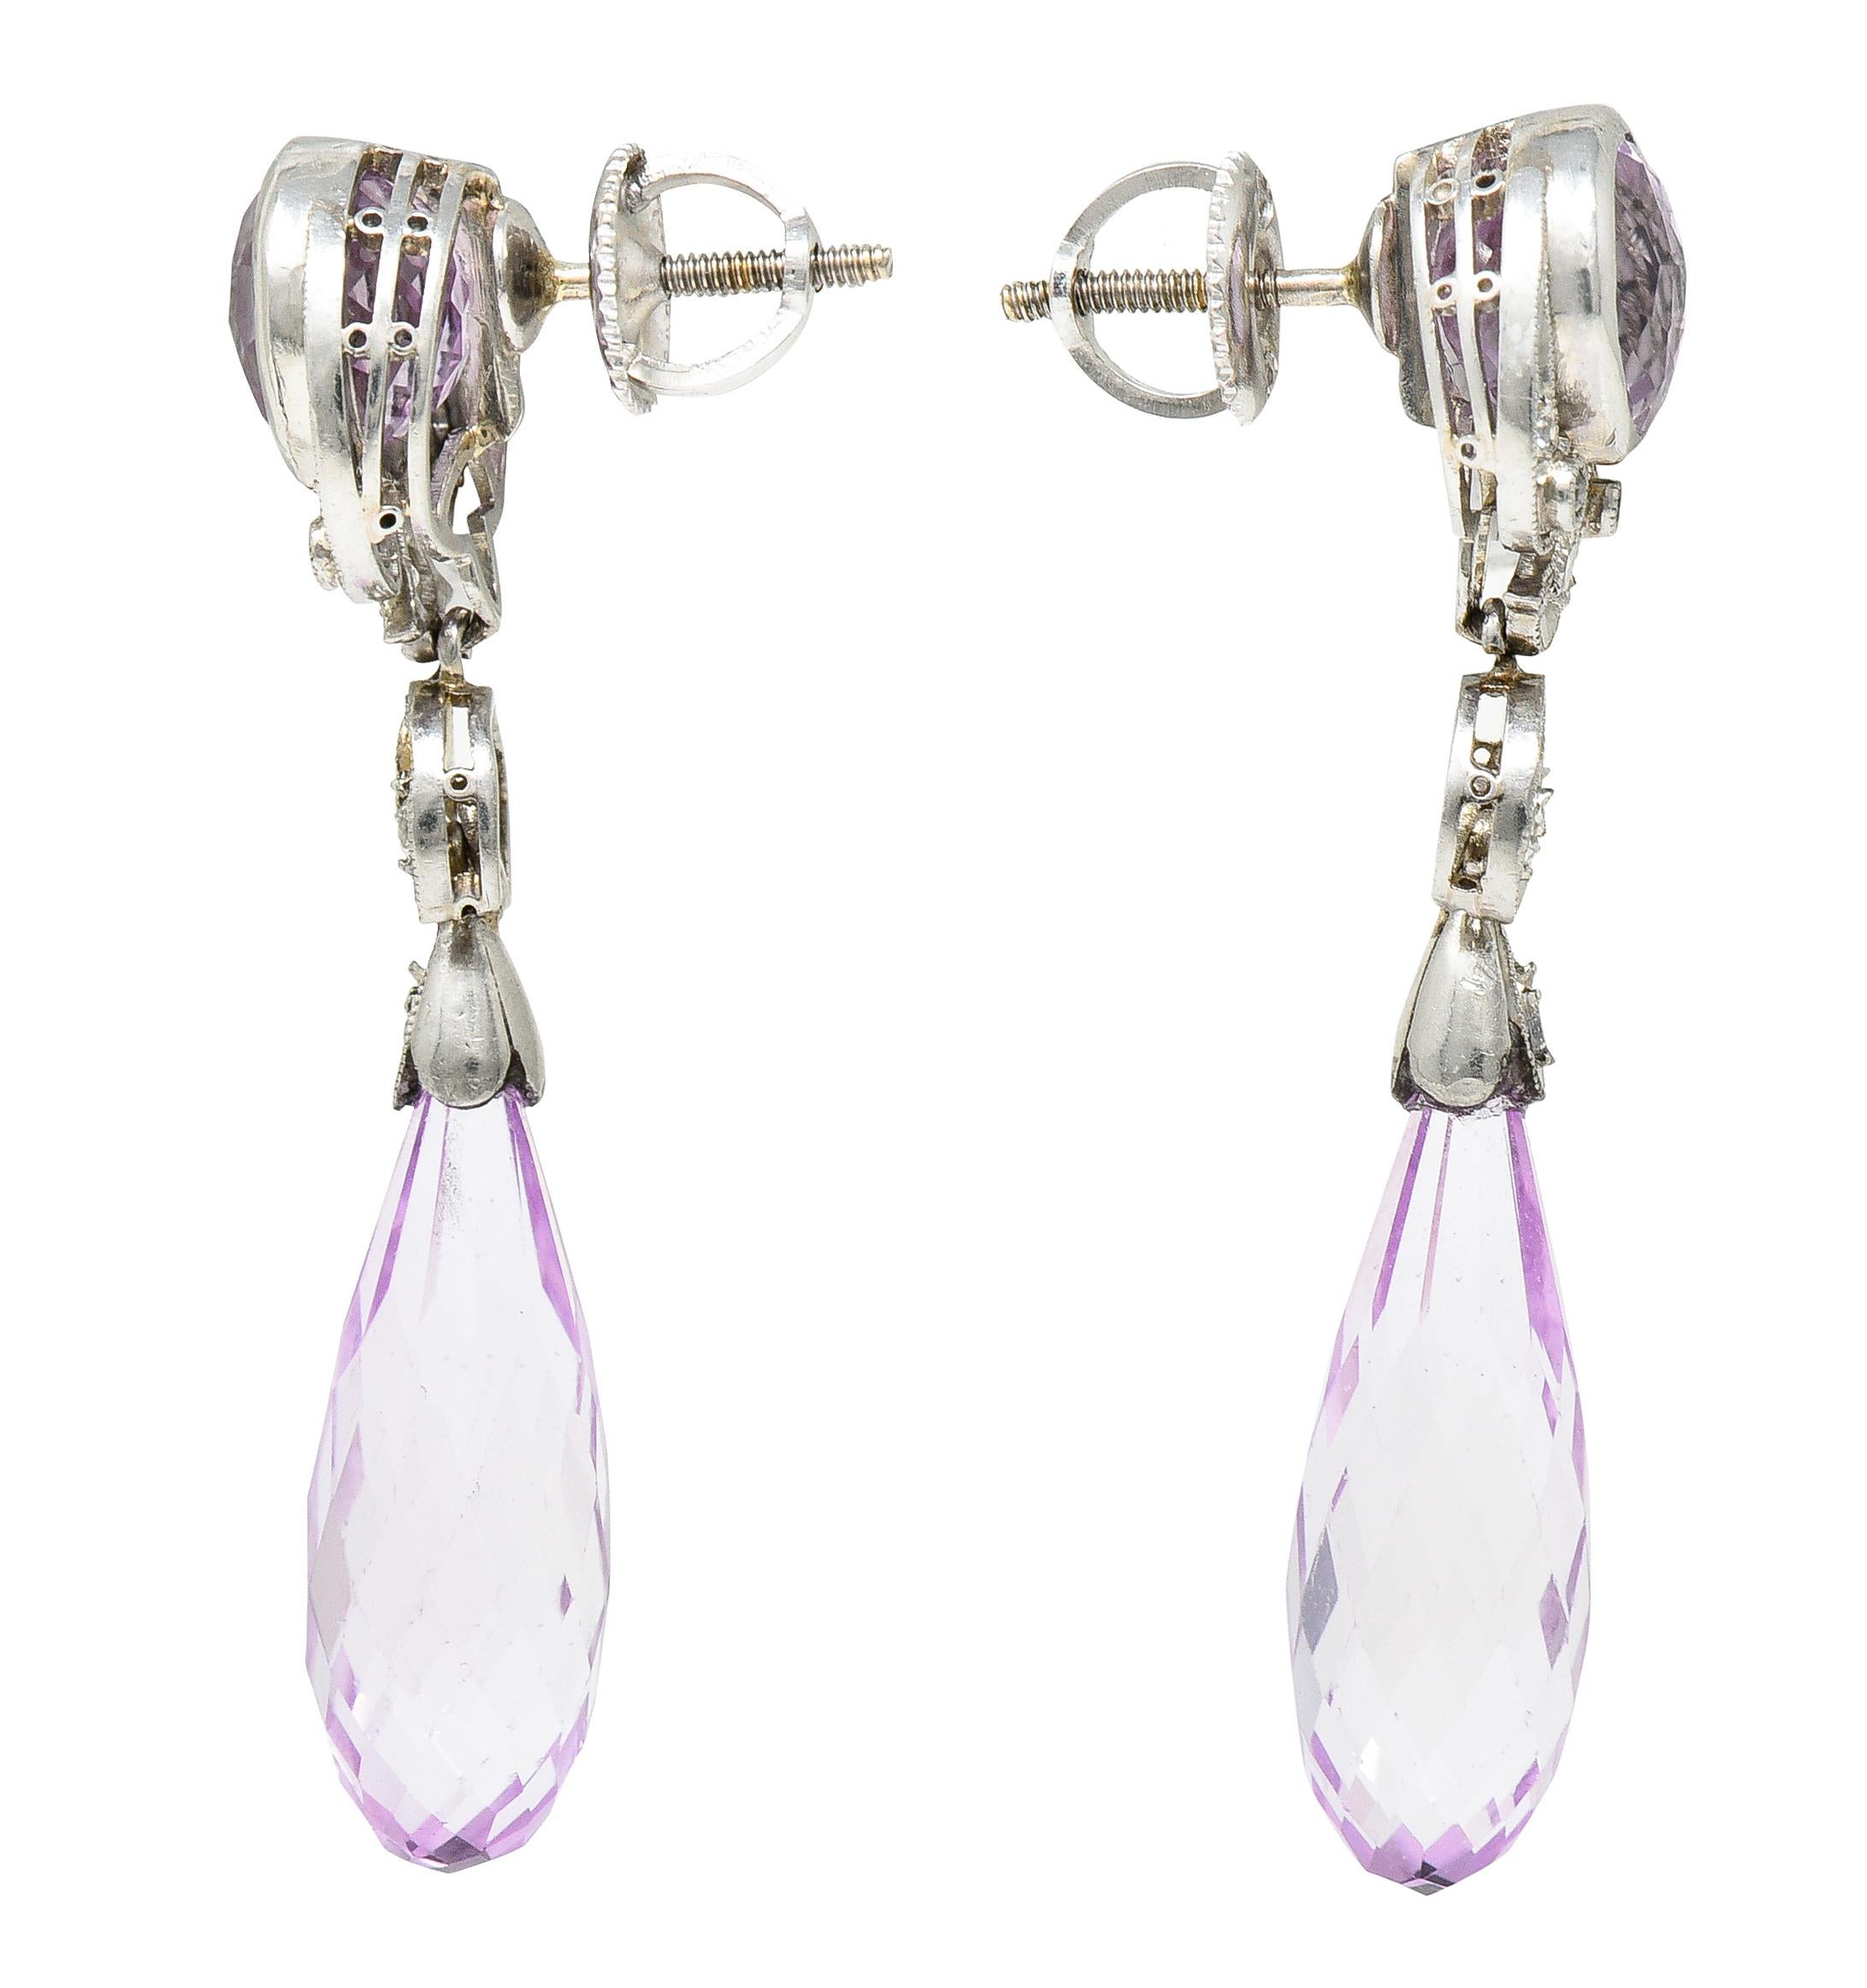 Earring surmounts feature 7.0 mm round checkerboard cut kunzite spodumene. Bezel set with scrolling details and suspending an articulated drop. Featuring briolette pampel drops measuring approximately 7.0 x 19.0 mm. With a scalloped platinum top